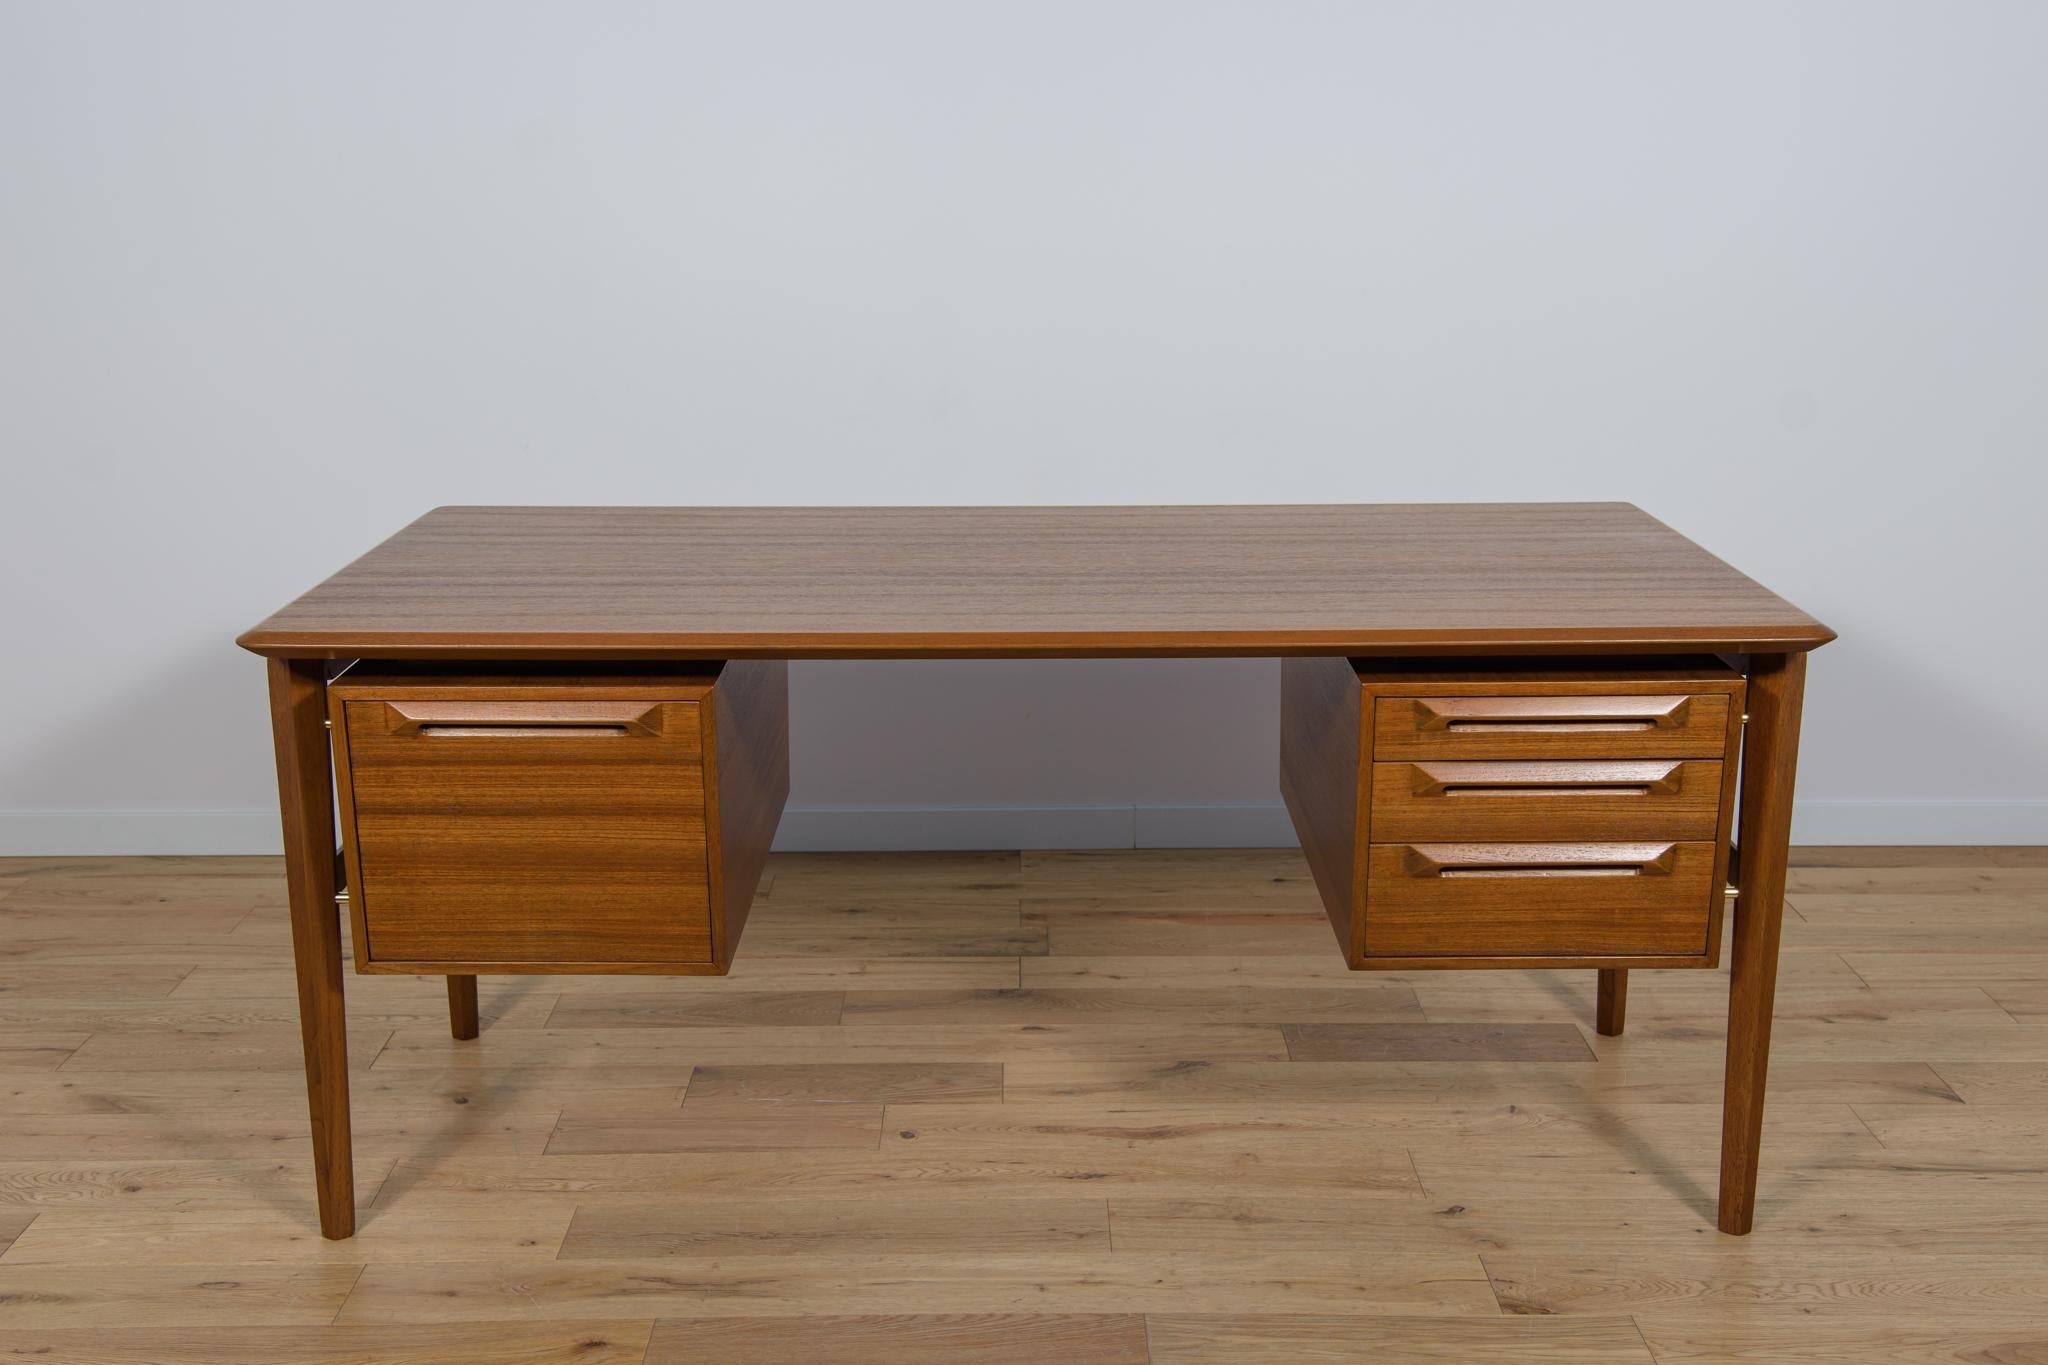 The desk was designed by the Danish designer Ib Kofod-Larsen, manufactured in the 1950s in the Swedish factory Seffle Möbelfabrik. The desk with an interesting modernist form is an example of the Scandinavian design school from the mid-20th century.